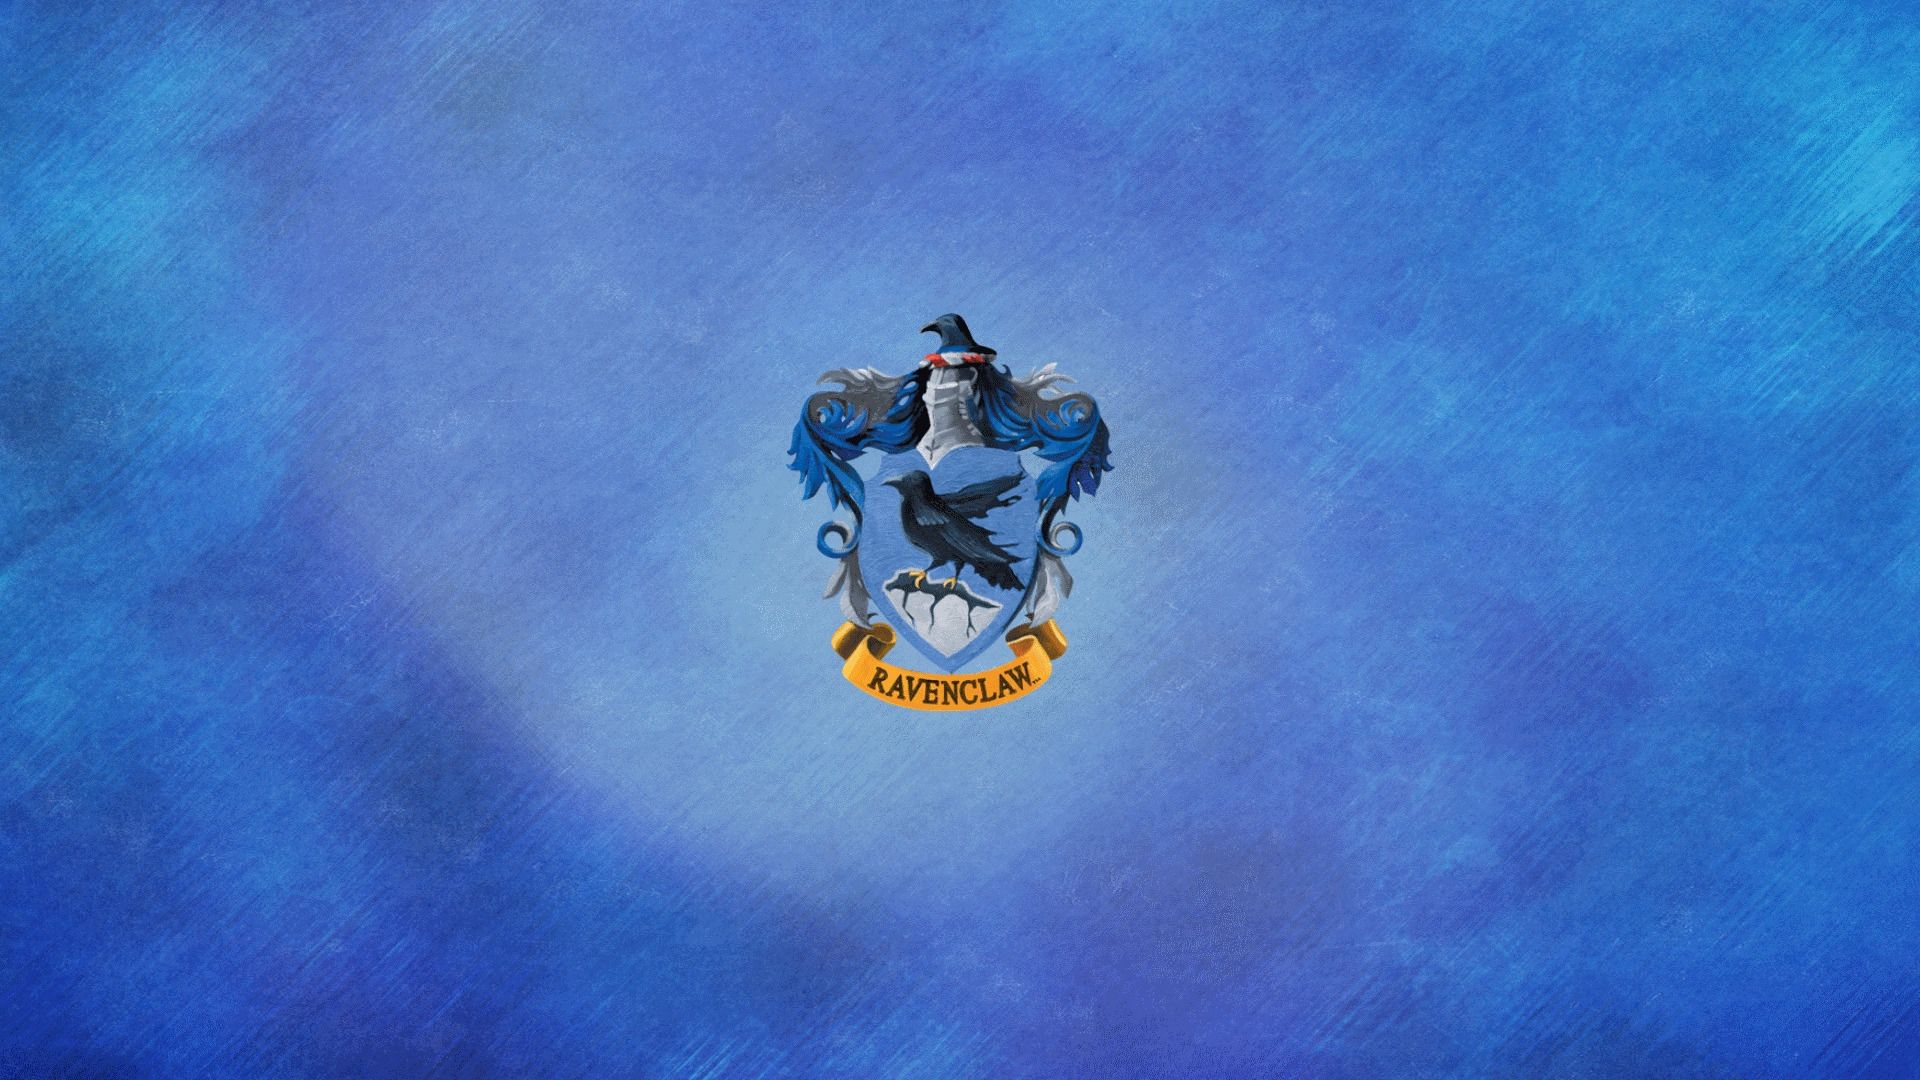 Ravenclaw crest from Harry Potter on a blue background - Ravenclaw